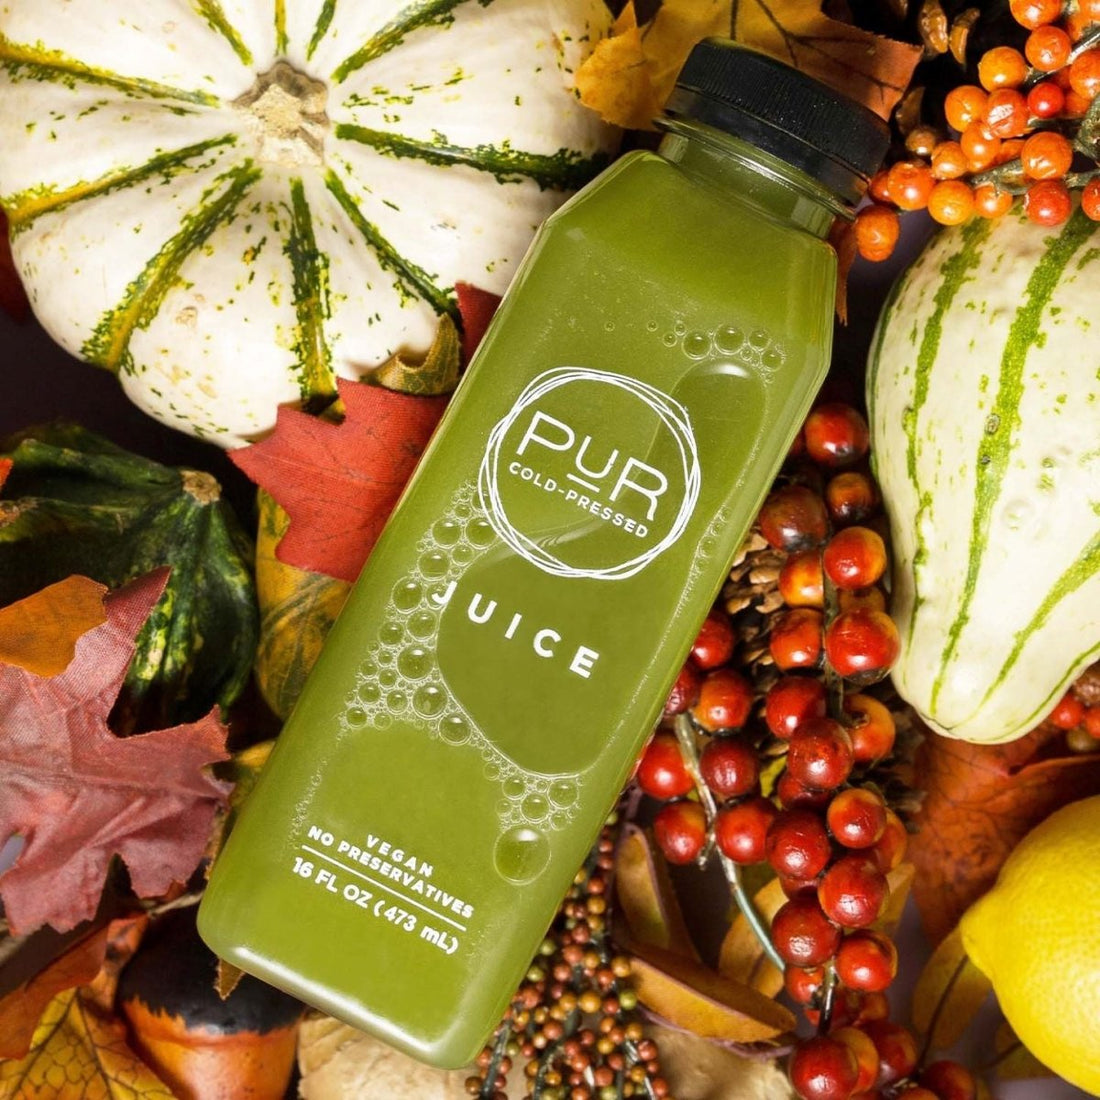 Plant-Based Protein That Can Give You More Energy - PUR Cold Pressed Juice